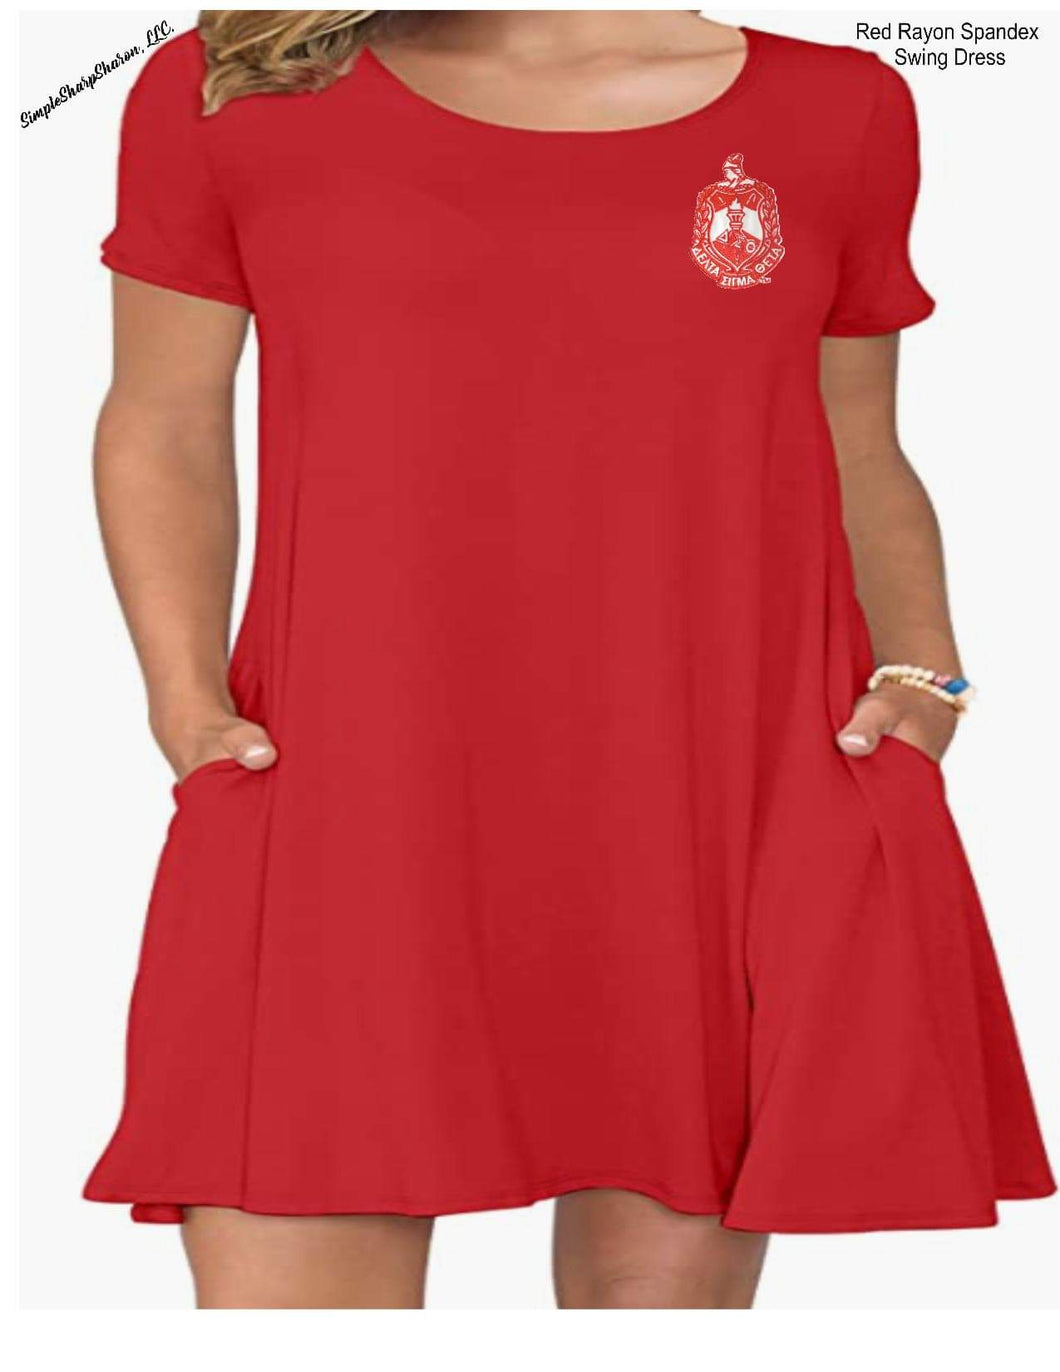 Red Swing Dress with DST Shield